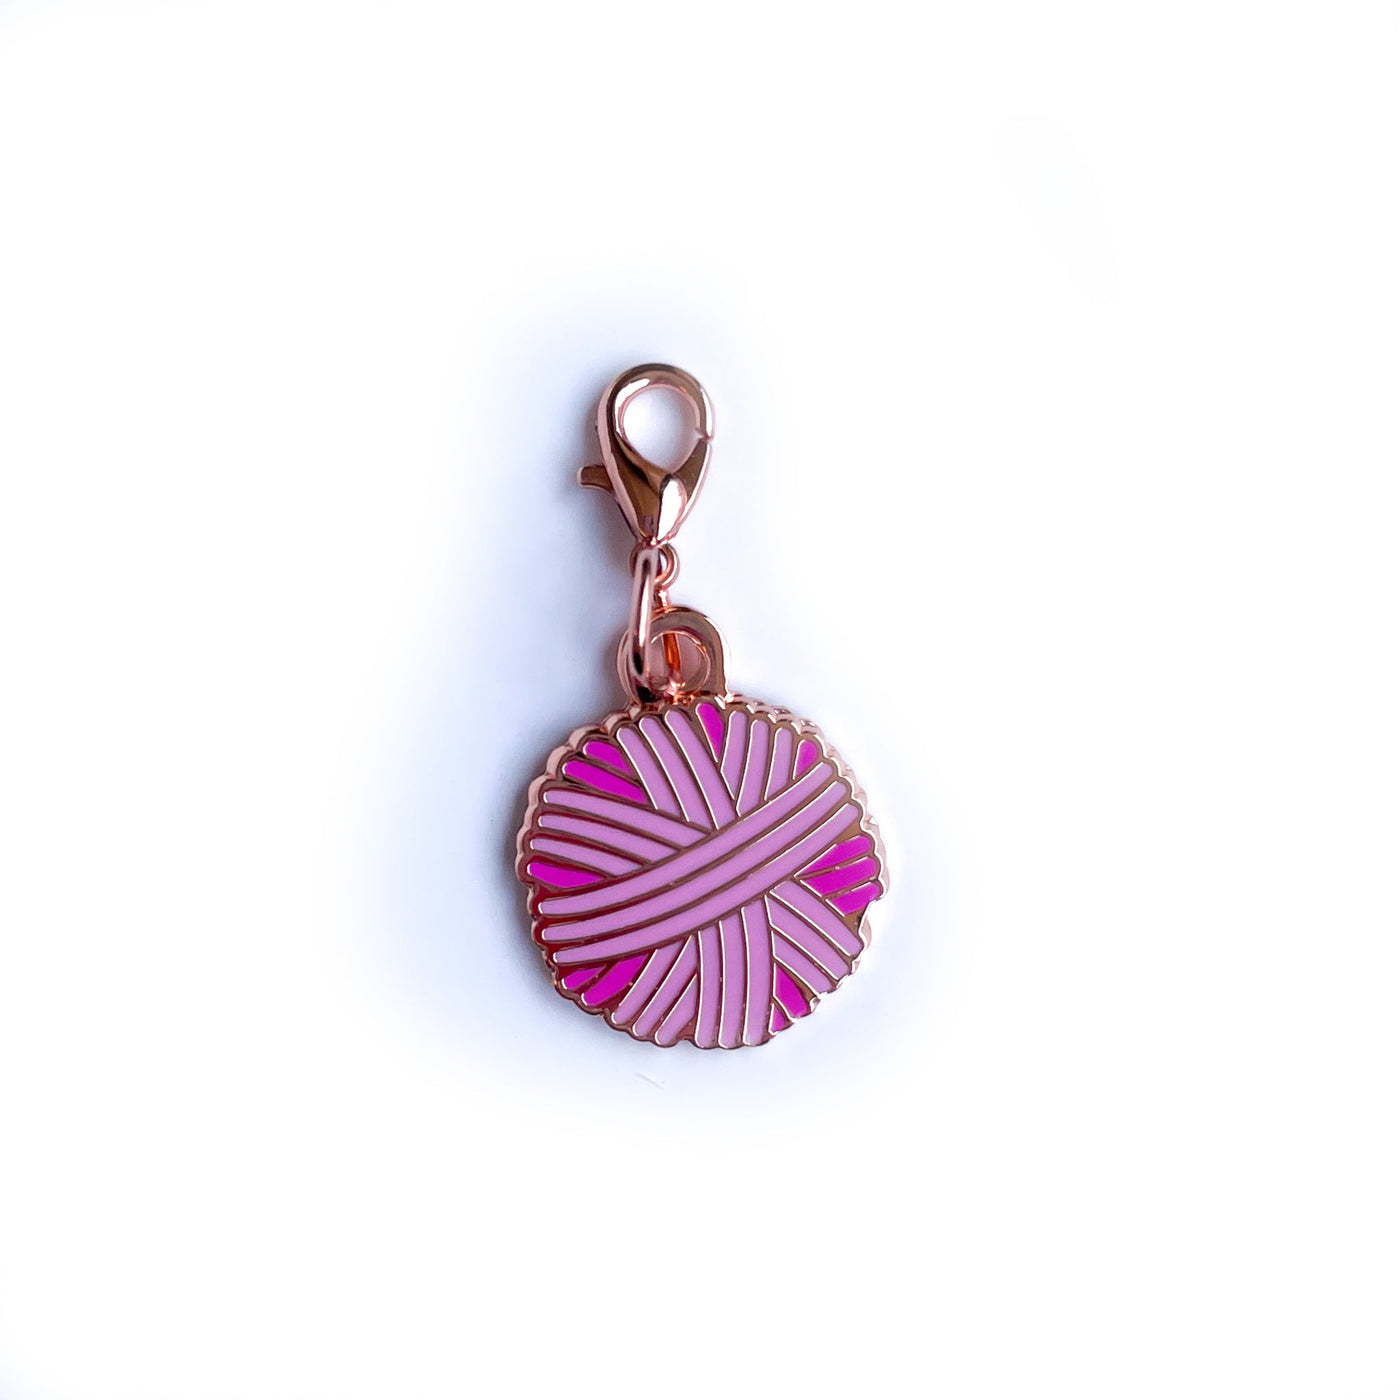 A yarn ball shaped charm in shades of pink with a lobster claw clasp. 